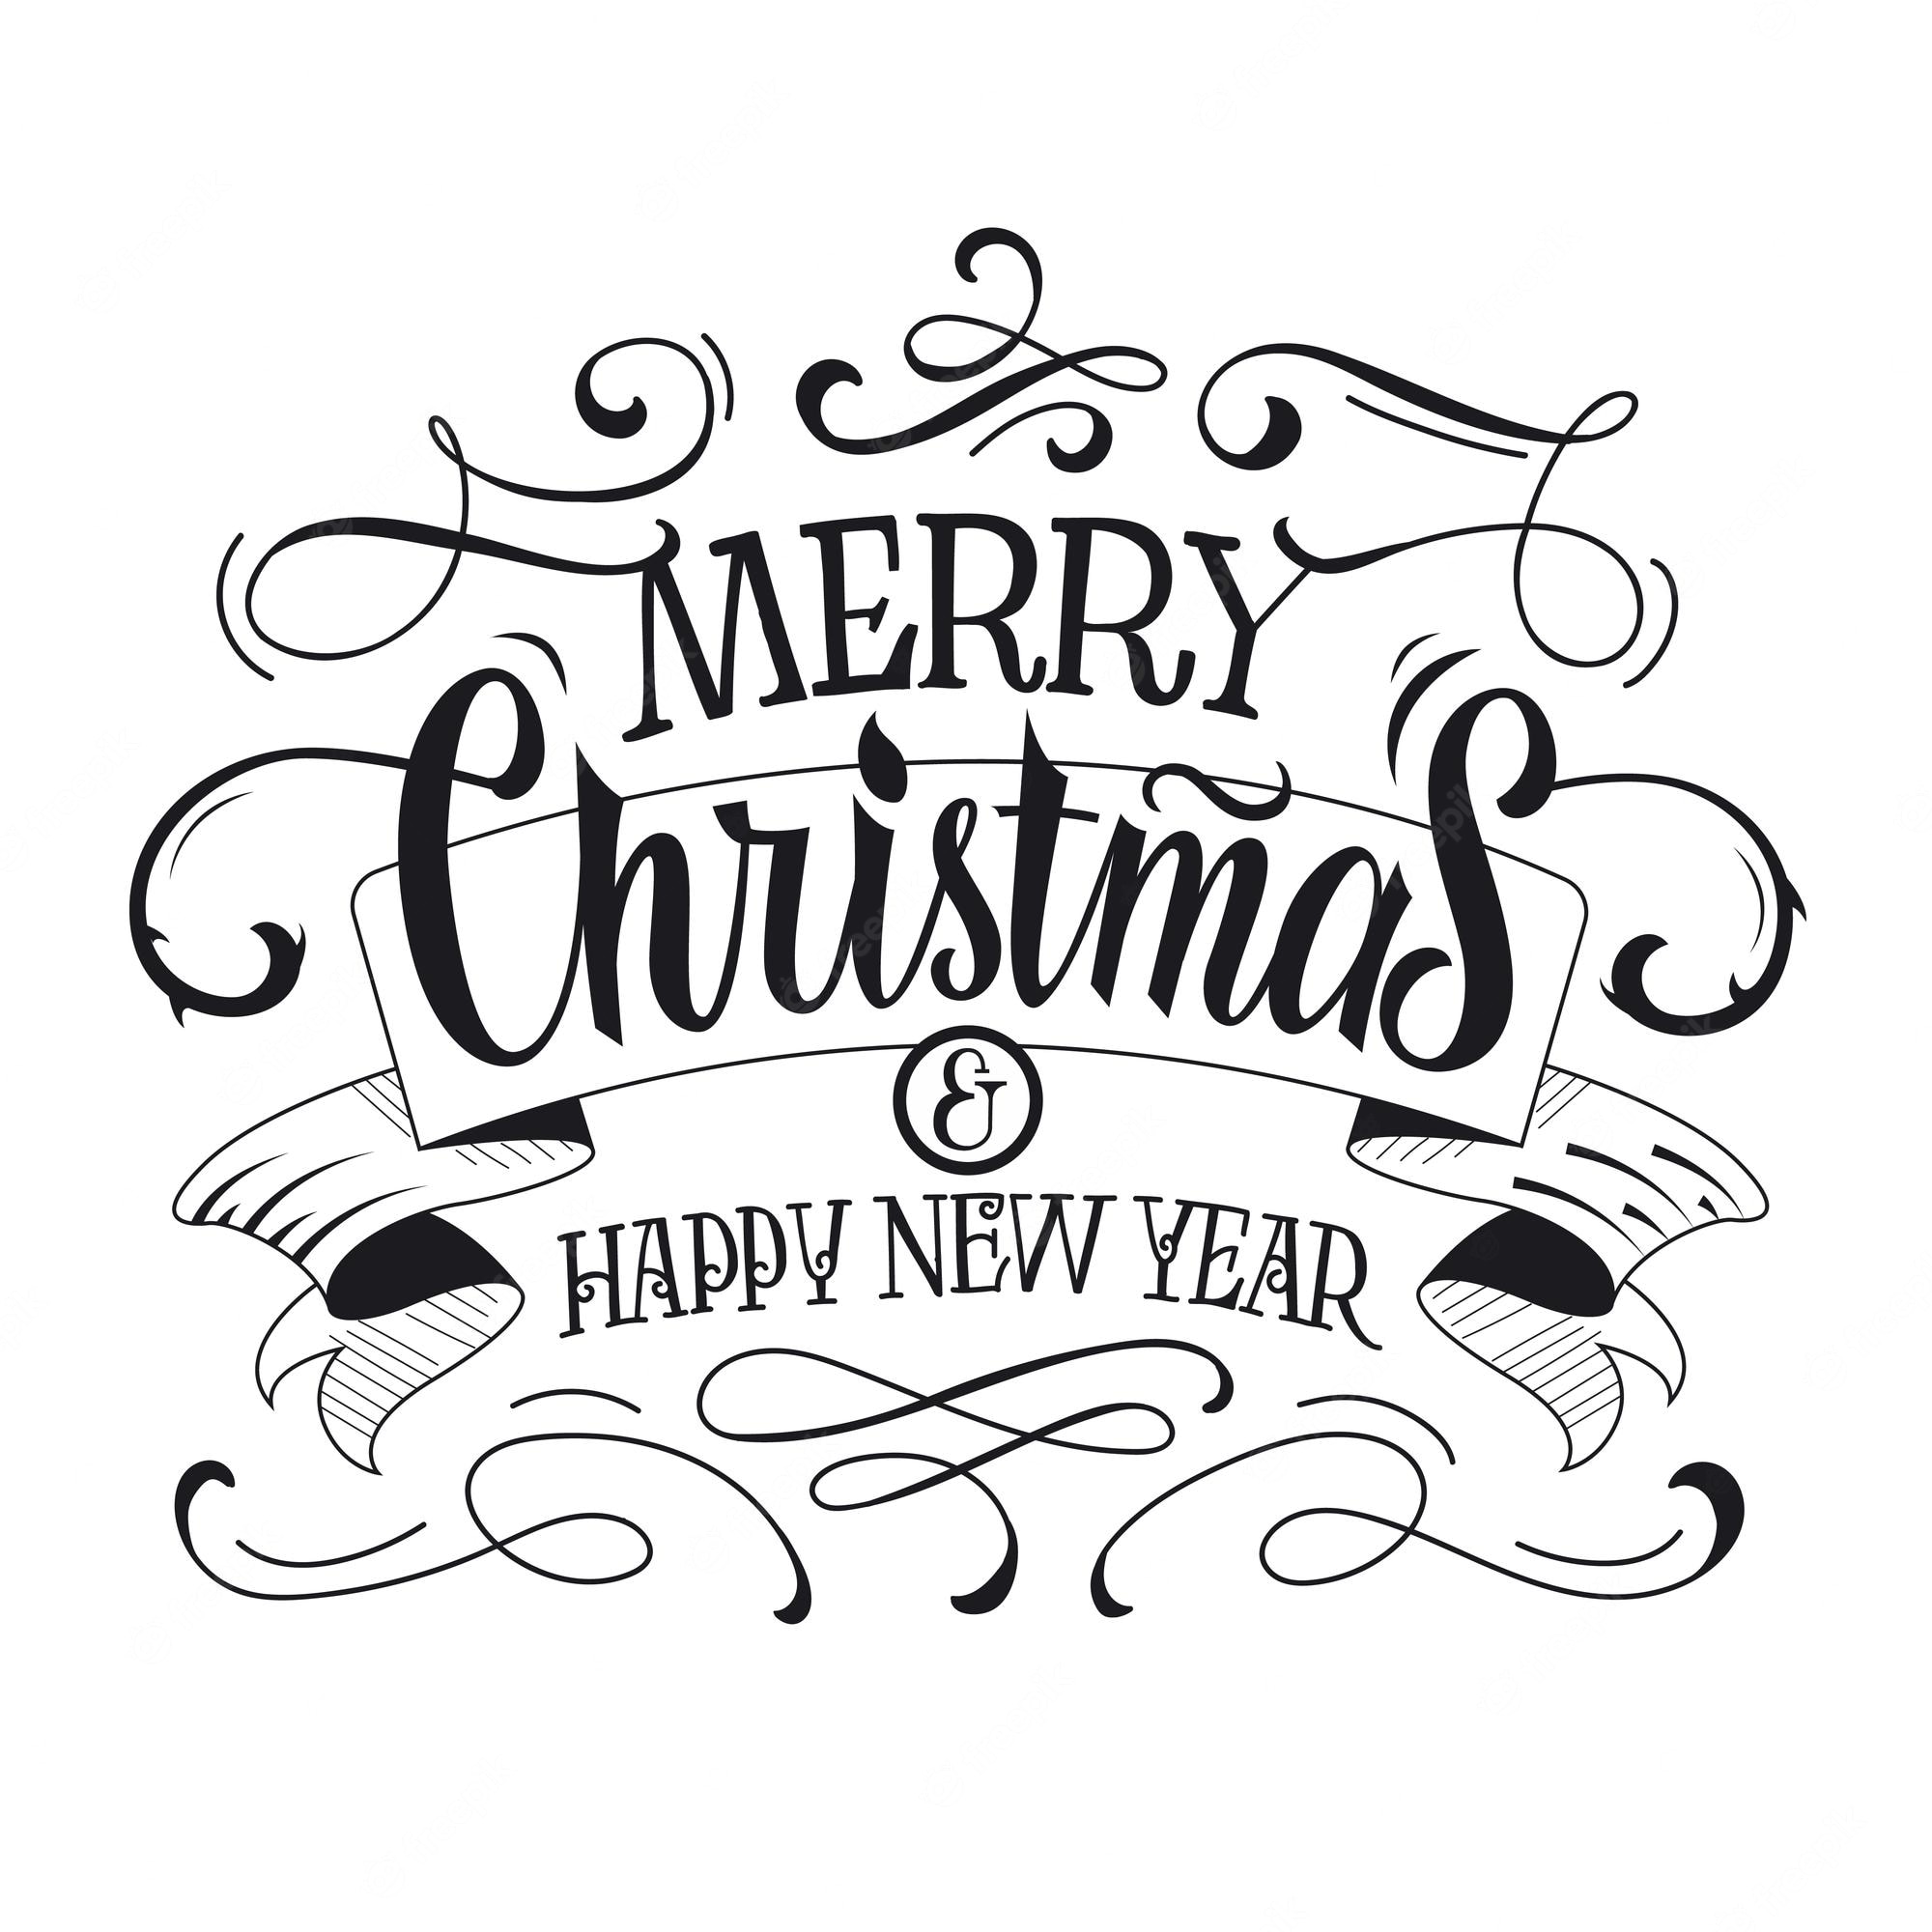 Merry Christmas Lettering With Swirls Royalty Free SVG, Cliparts - Clip ...